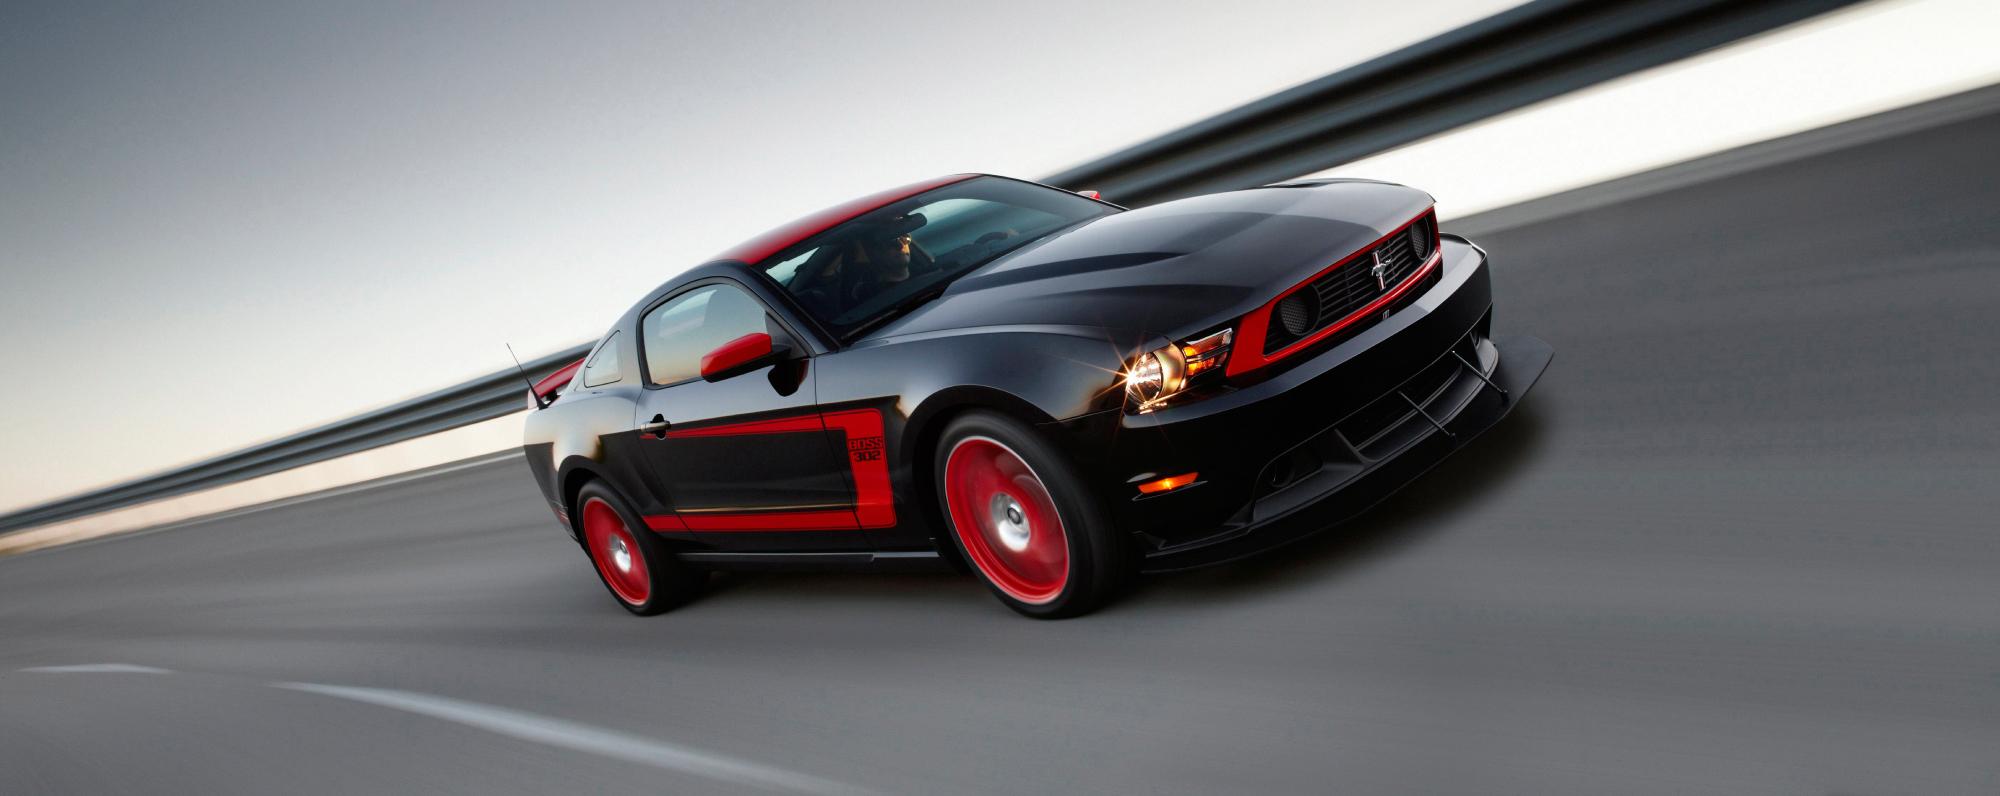 The rare 2012 Ford Mustang Boss 302 Laguna Seca was fit for the track.